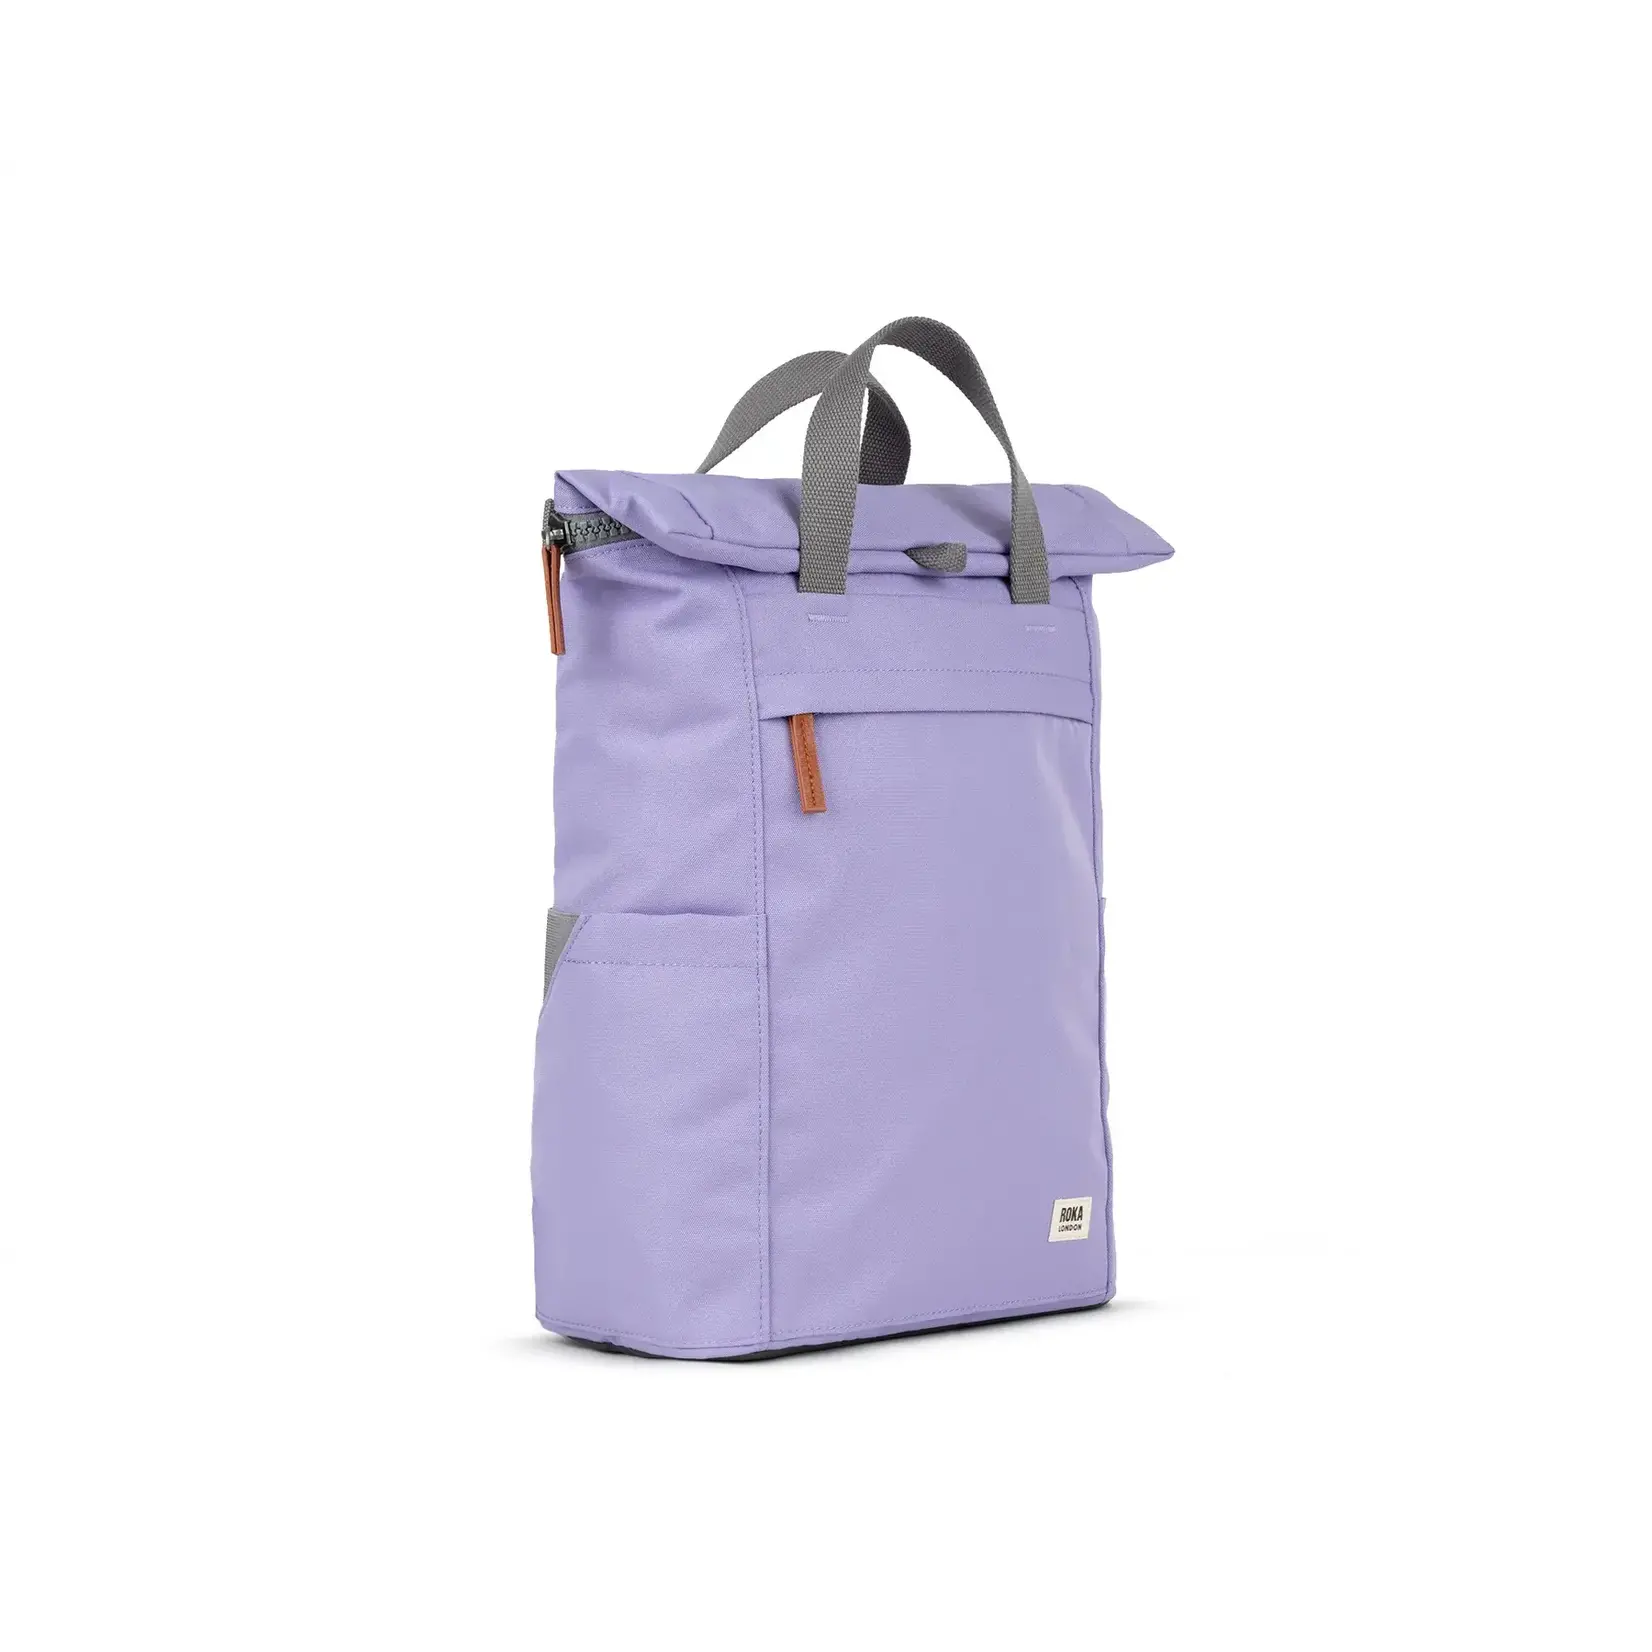 ROKA London Finchley A Lavender Recycled Canvas12-15 recycled bottles Small